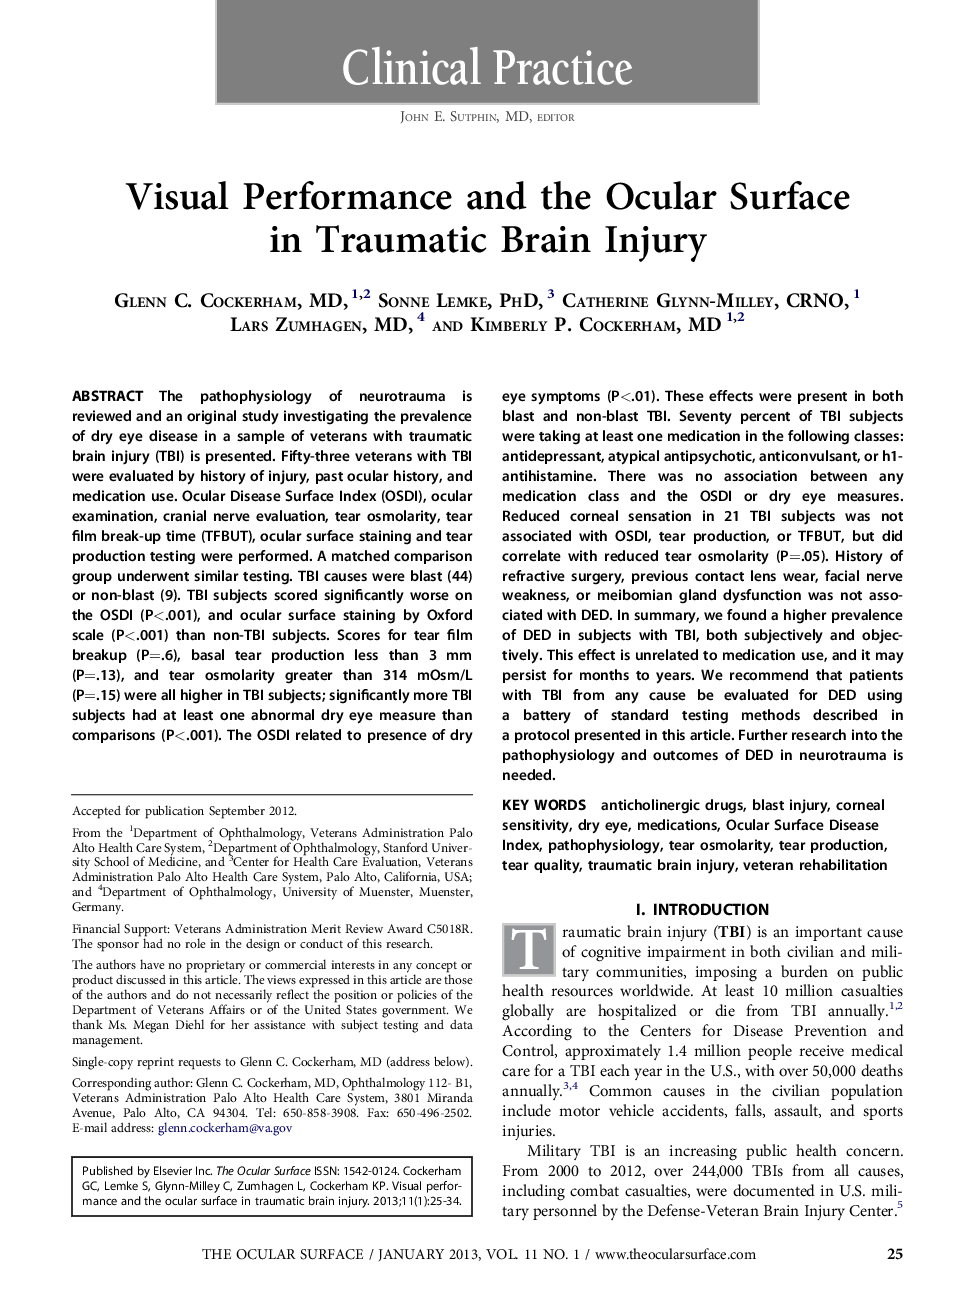 Visual Performance and the Ocular Surface in Traumatic Brain Injury 